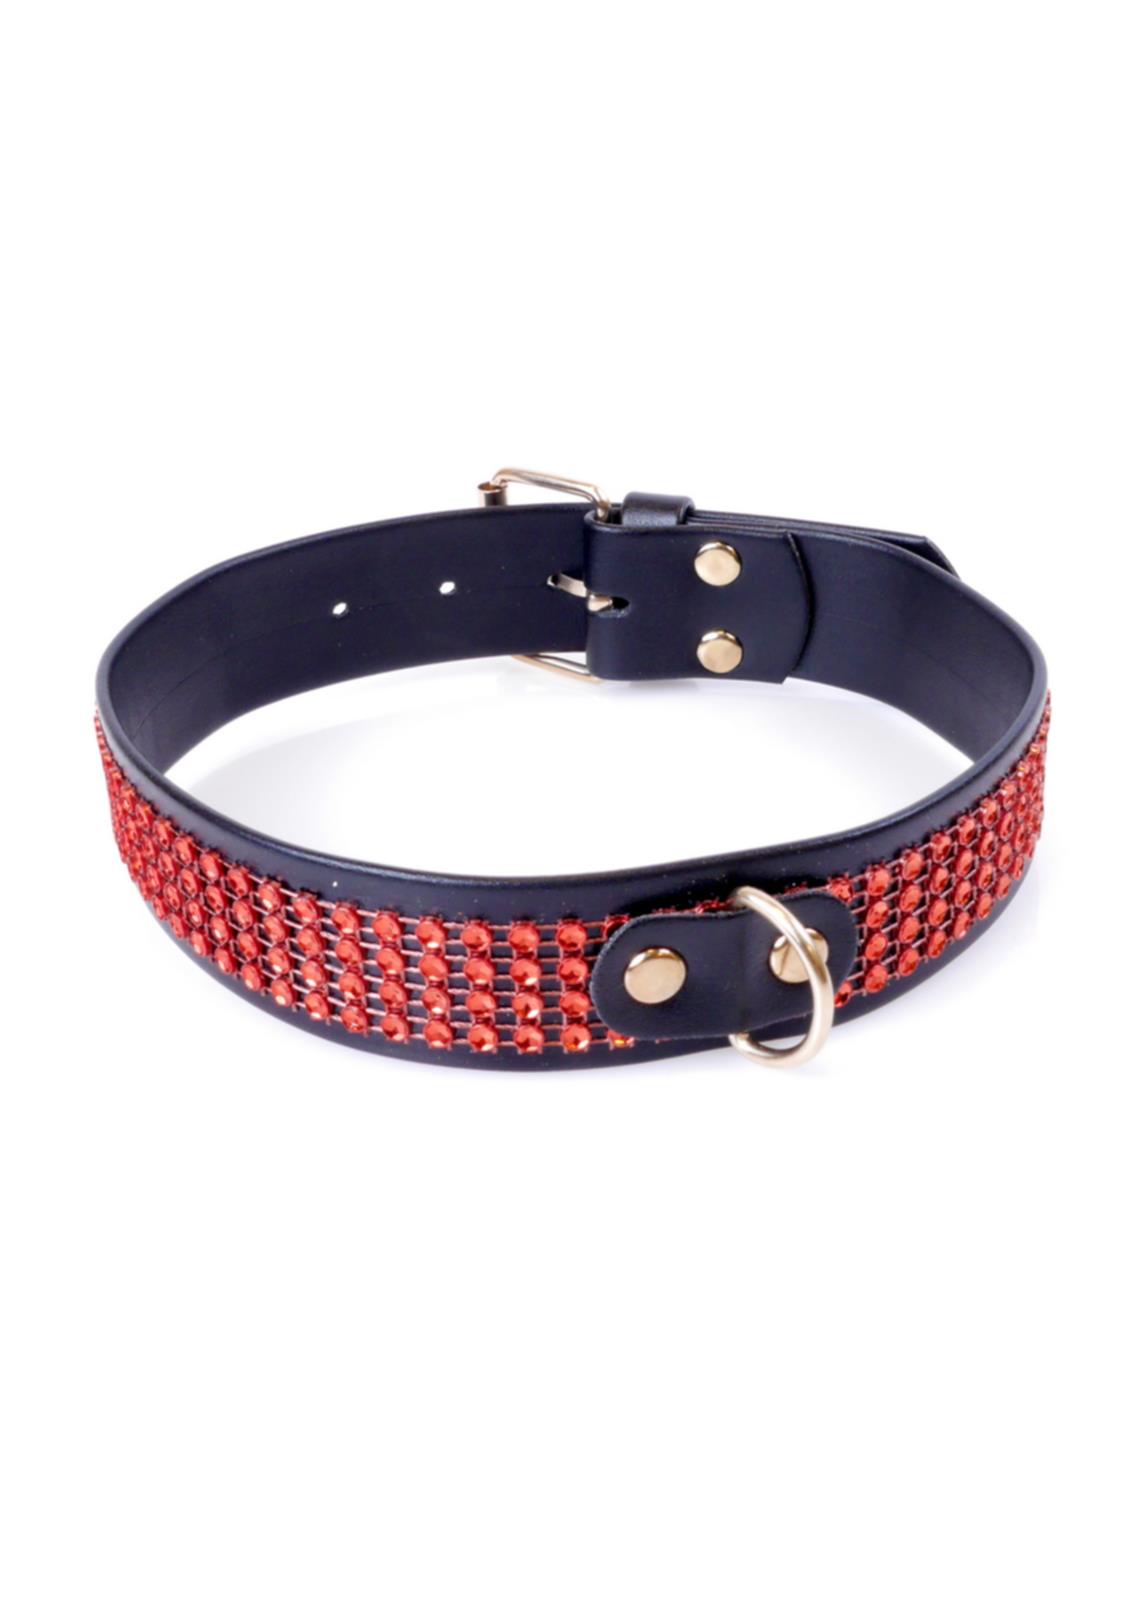 Bossoftoys - 33-00110 - Fetish Collar Red with stones - 3 cm width - Red line adjustable - easy to hang - with product tag /barcode